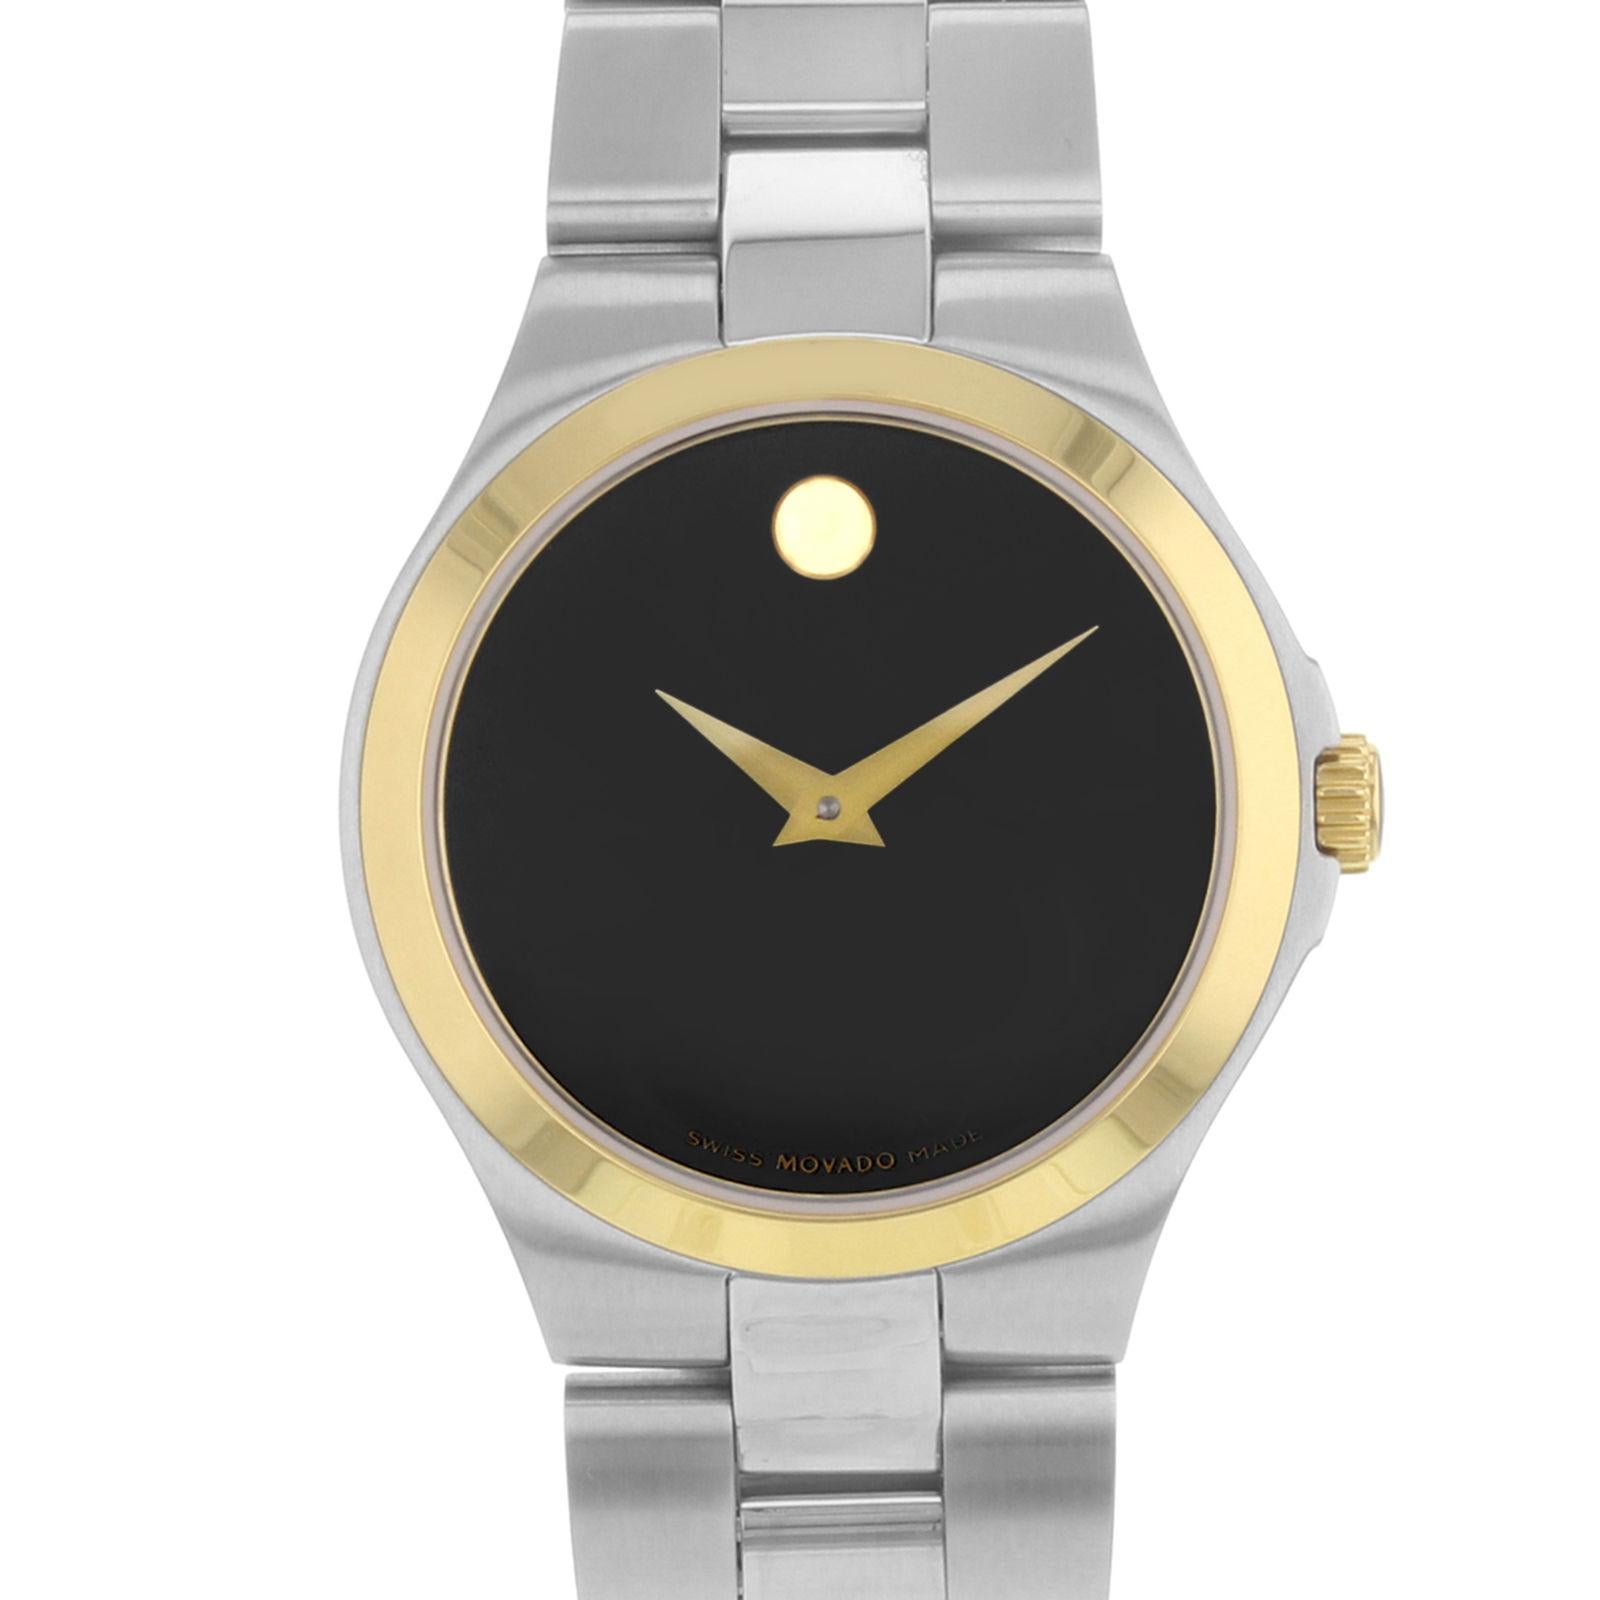 (16691)
This pre-owned Movado Sport 606910 is a beautiful Ladies timepiece that is powered by a quartz movement which is cased in a stainless steel case. It has a round shape face, no features dial and has hand unspecified style markers. It is